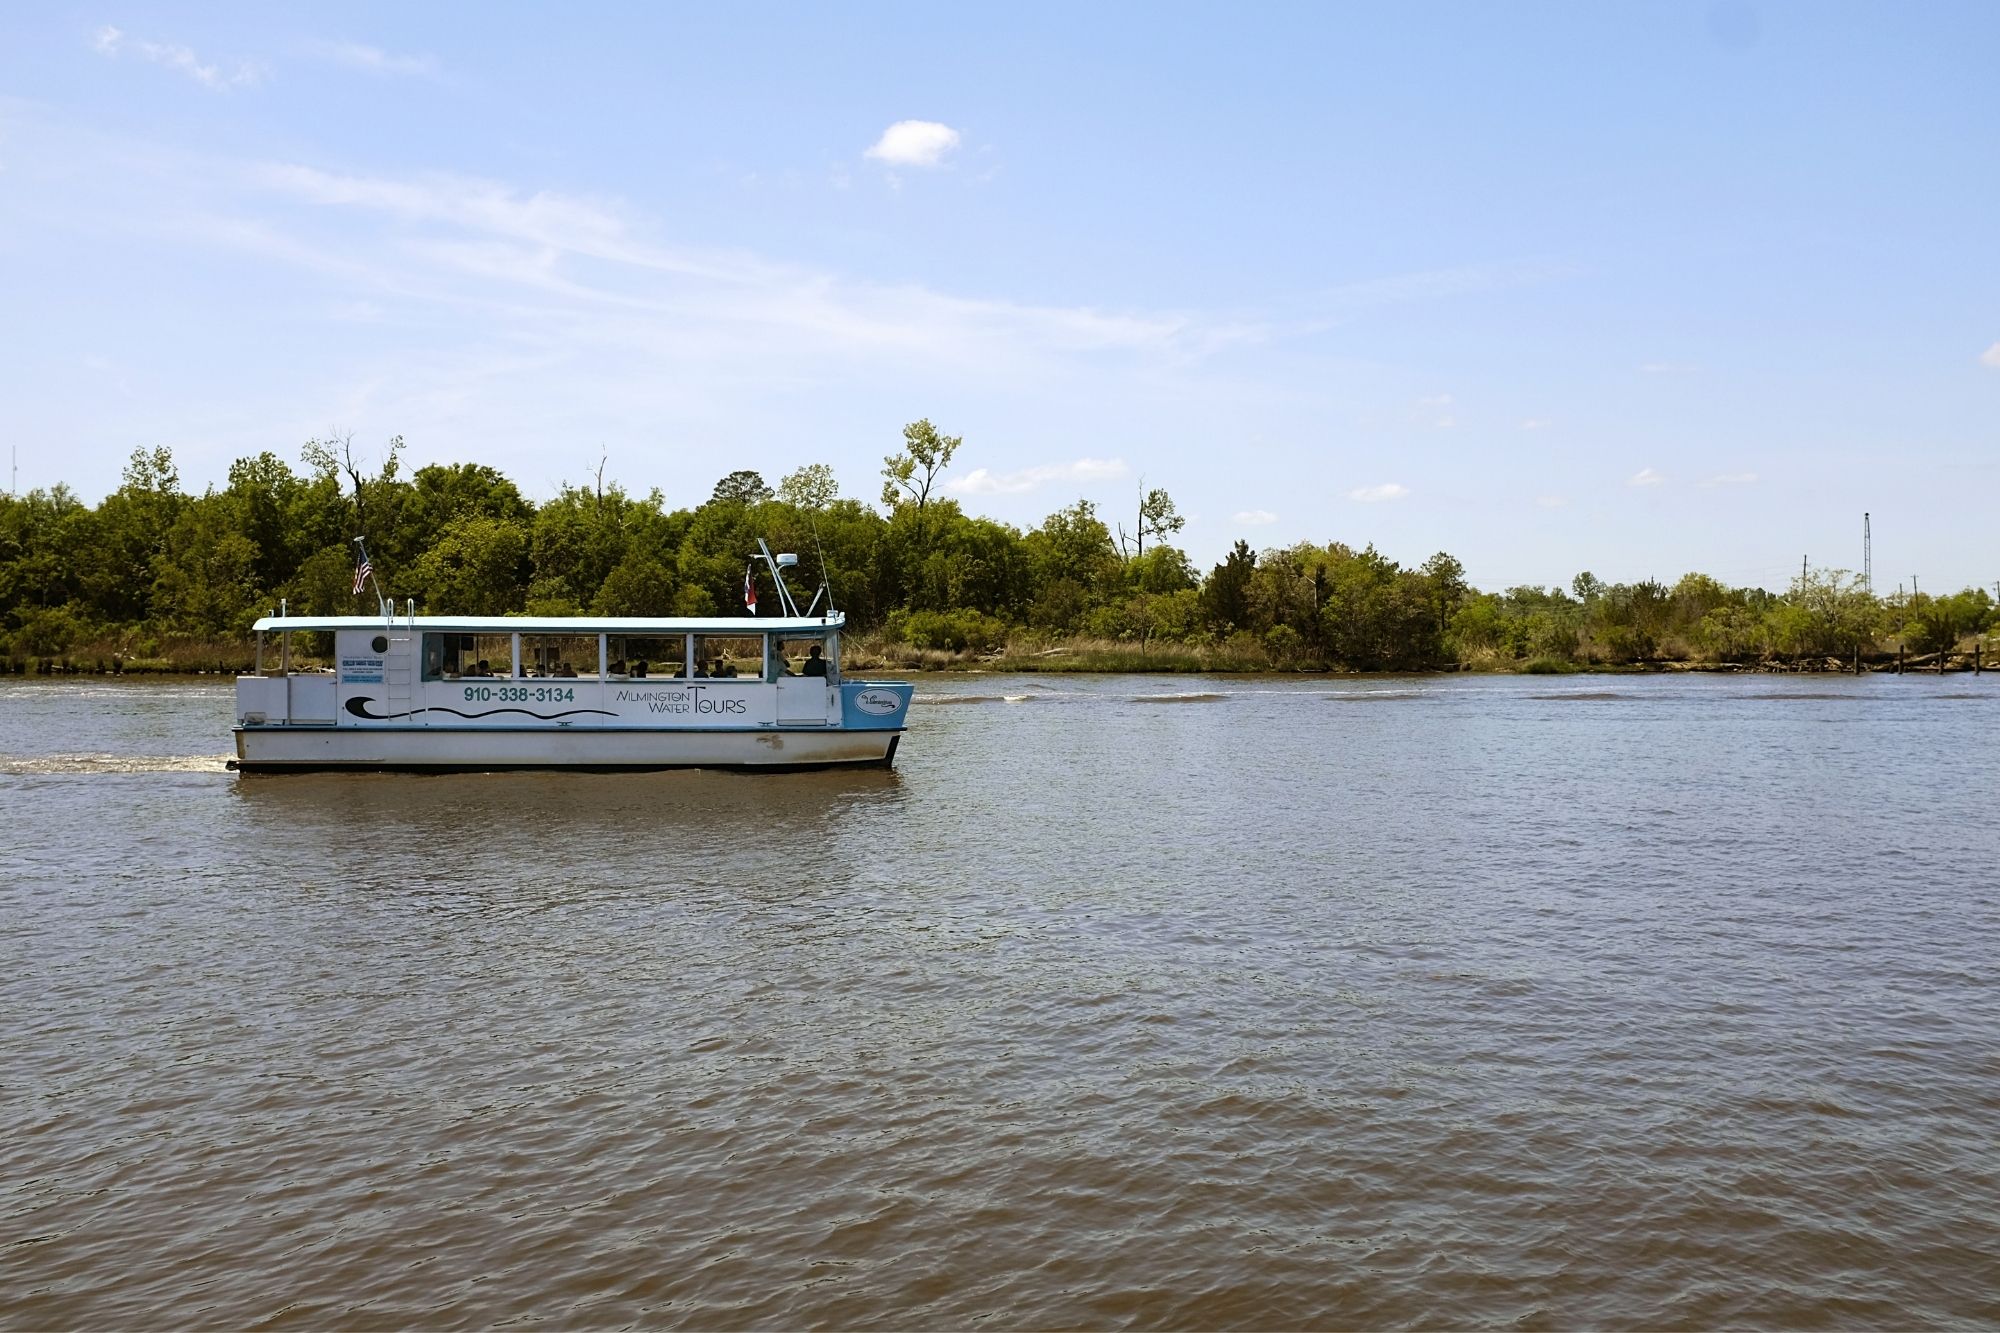 A view of the tour boat on the river